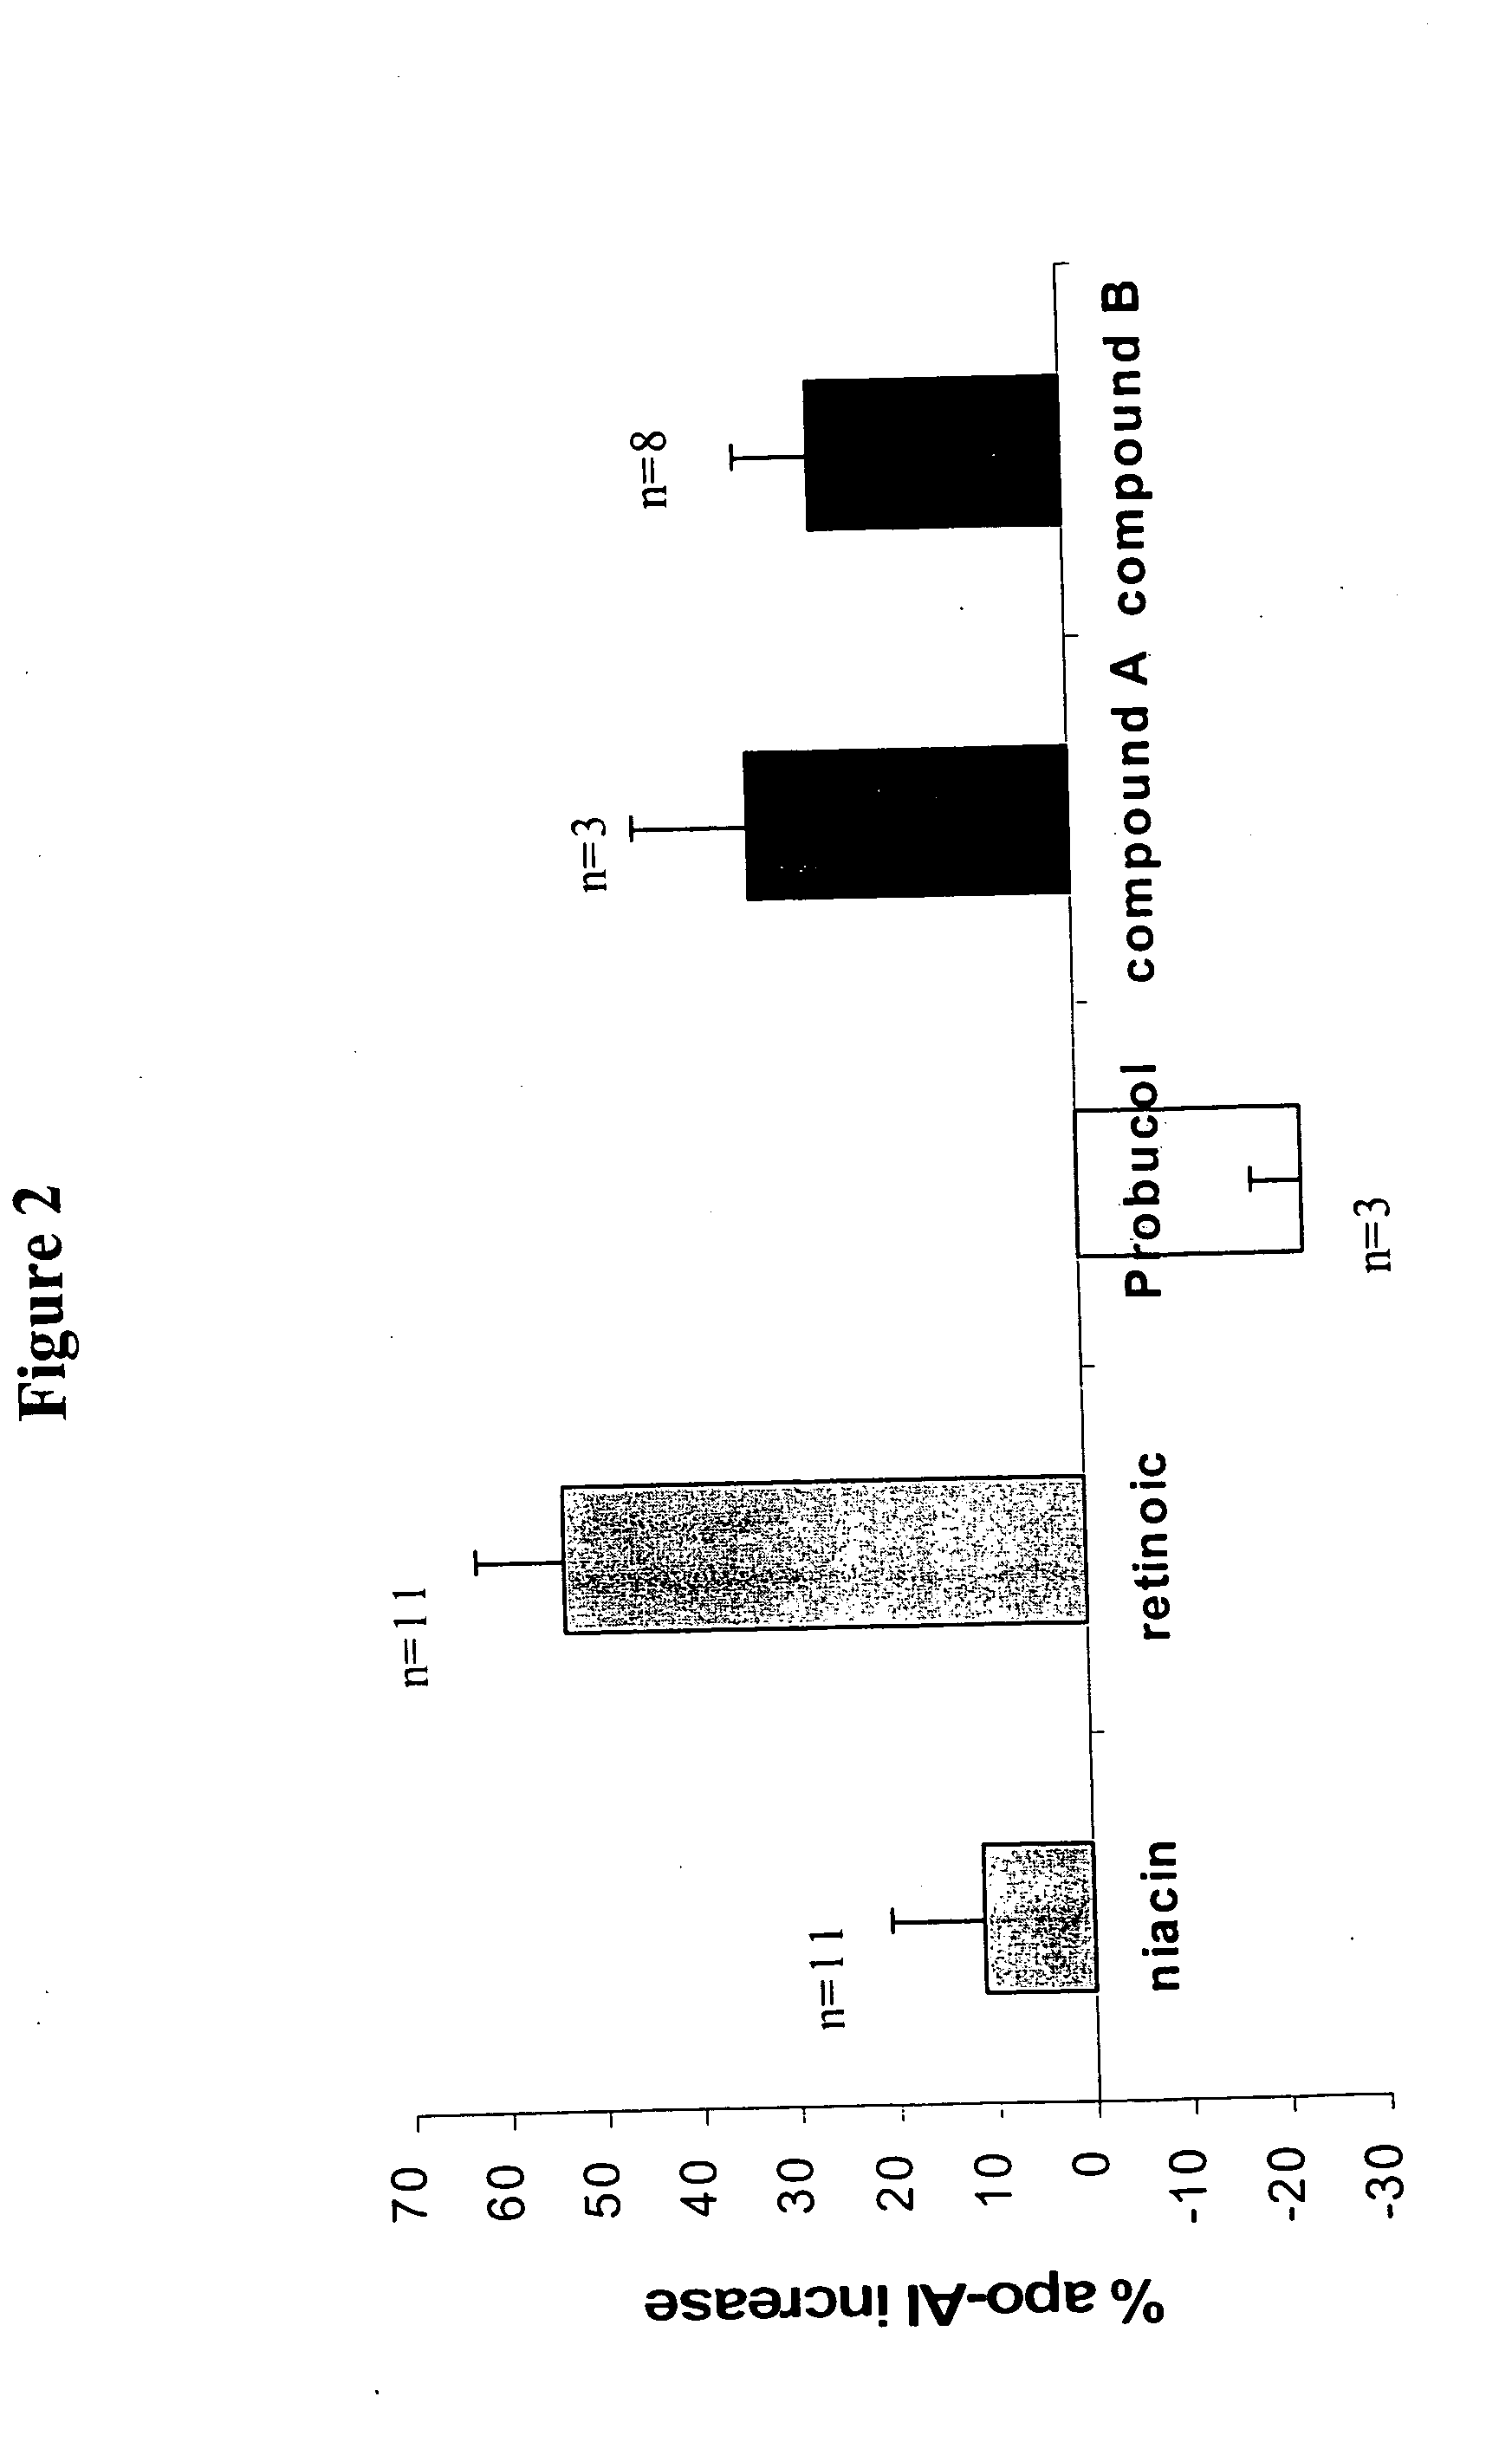 Methods to increase plasma HDL cholesterol levels and improve HDL functionality with probucol monoesters